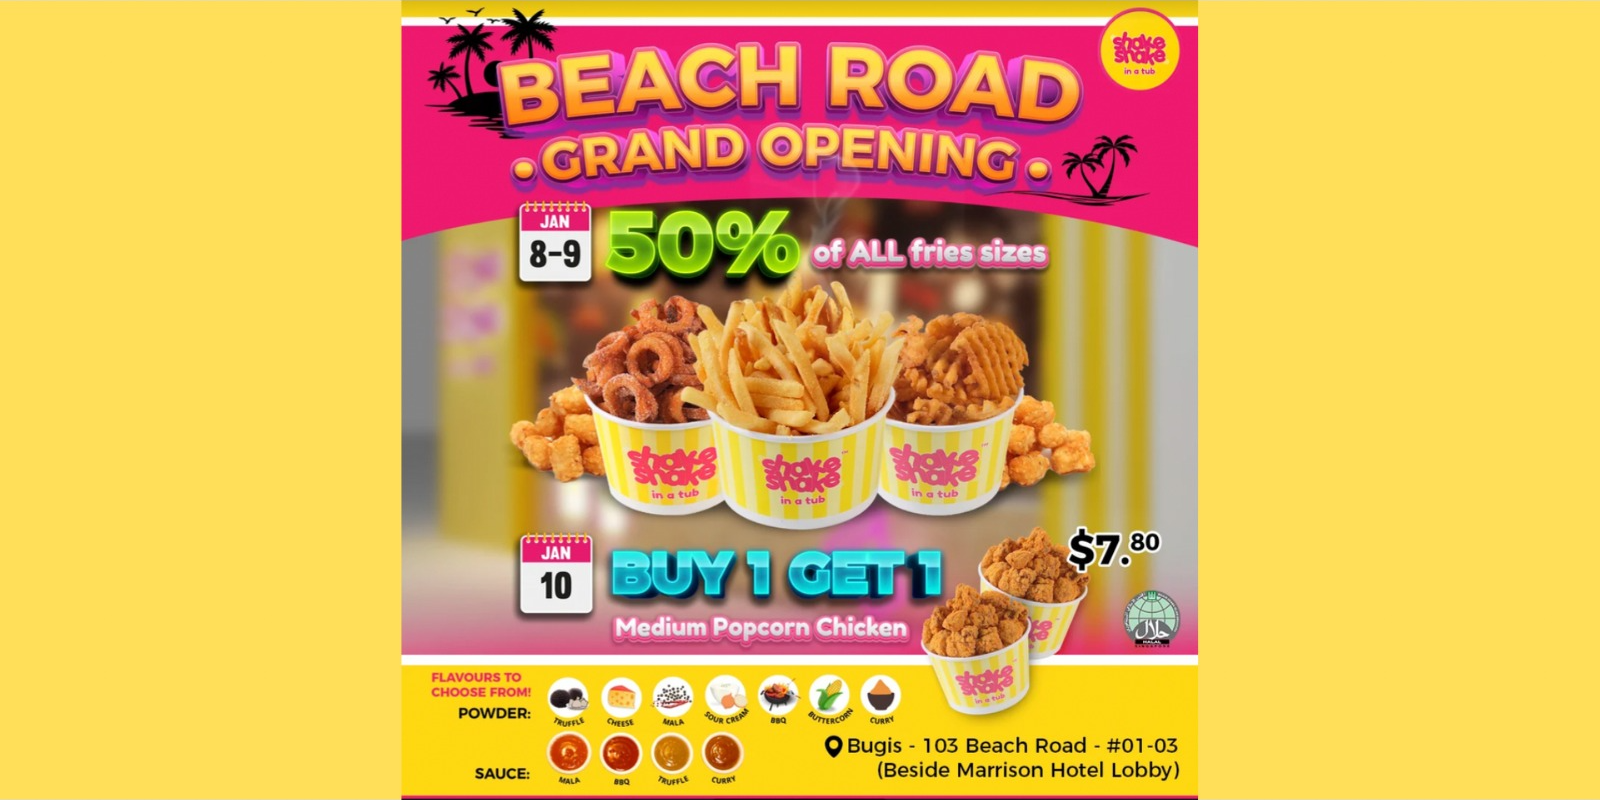 [Promotion] 50% off all Fries & 1-for-1 Popcorn Chicken at Shake Shake in A Tub’s Newest Beach Road